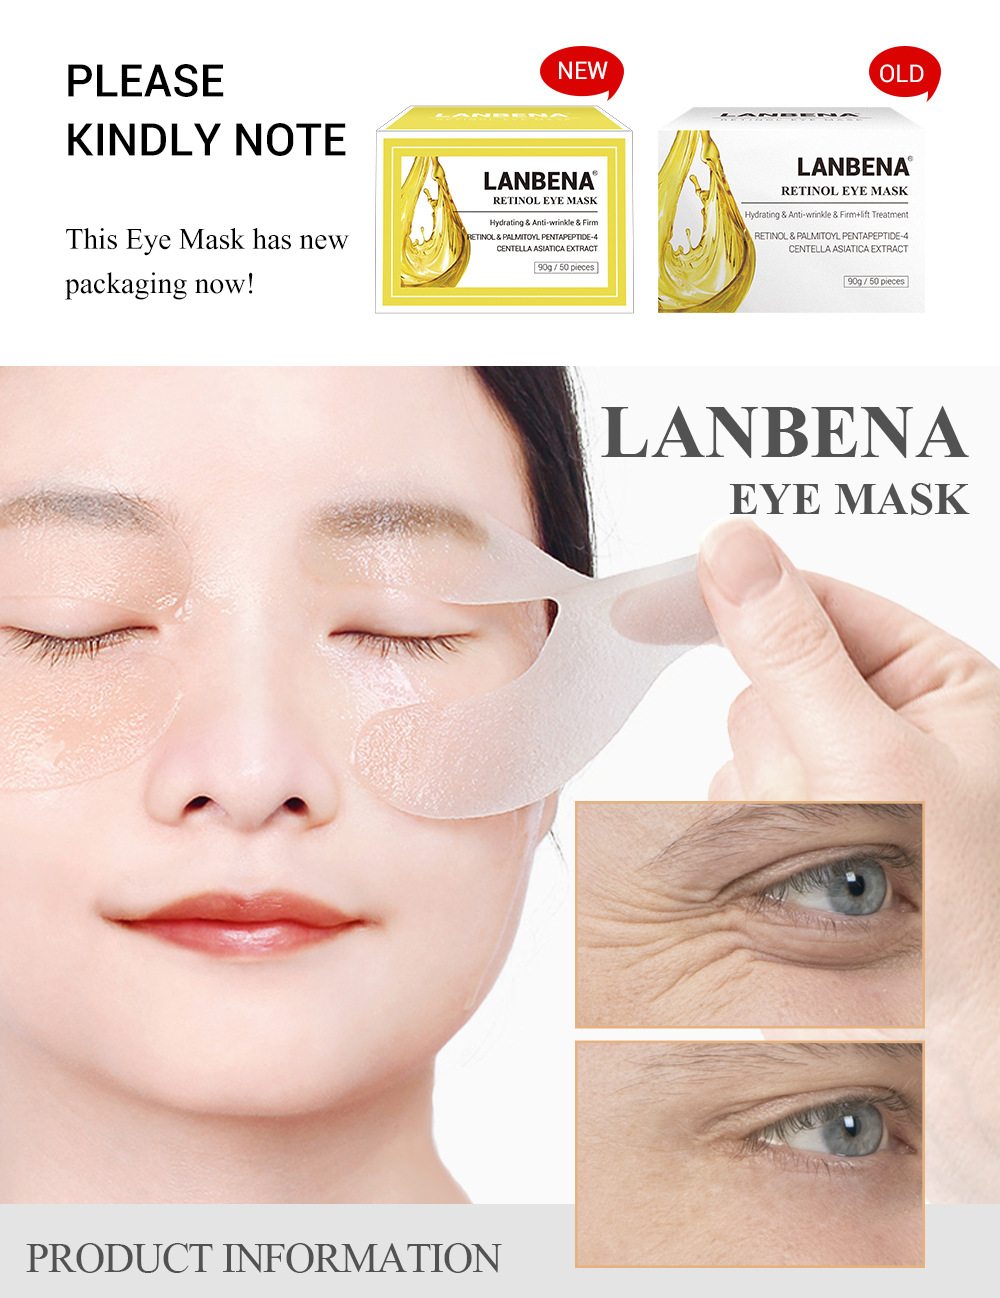 Functional-Eye-Mask-Soothes-Wrinkles-Removes-Edema-Anti-Aging-Lifts-Tightens-Eye-Mask-1537425-1